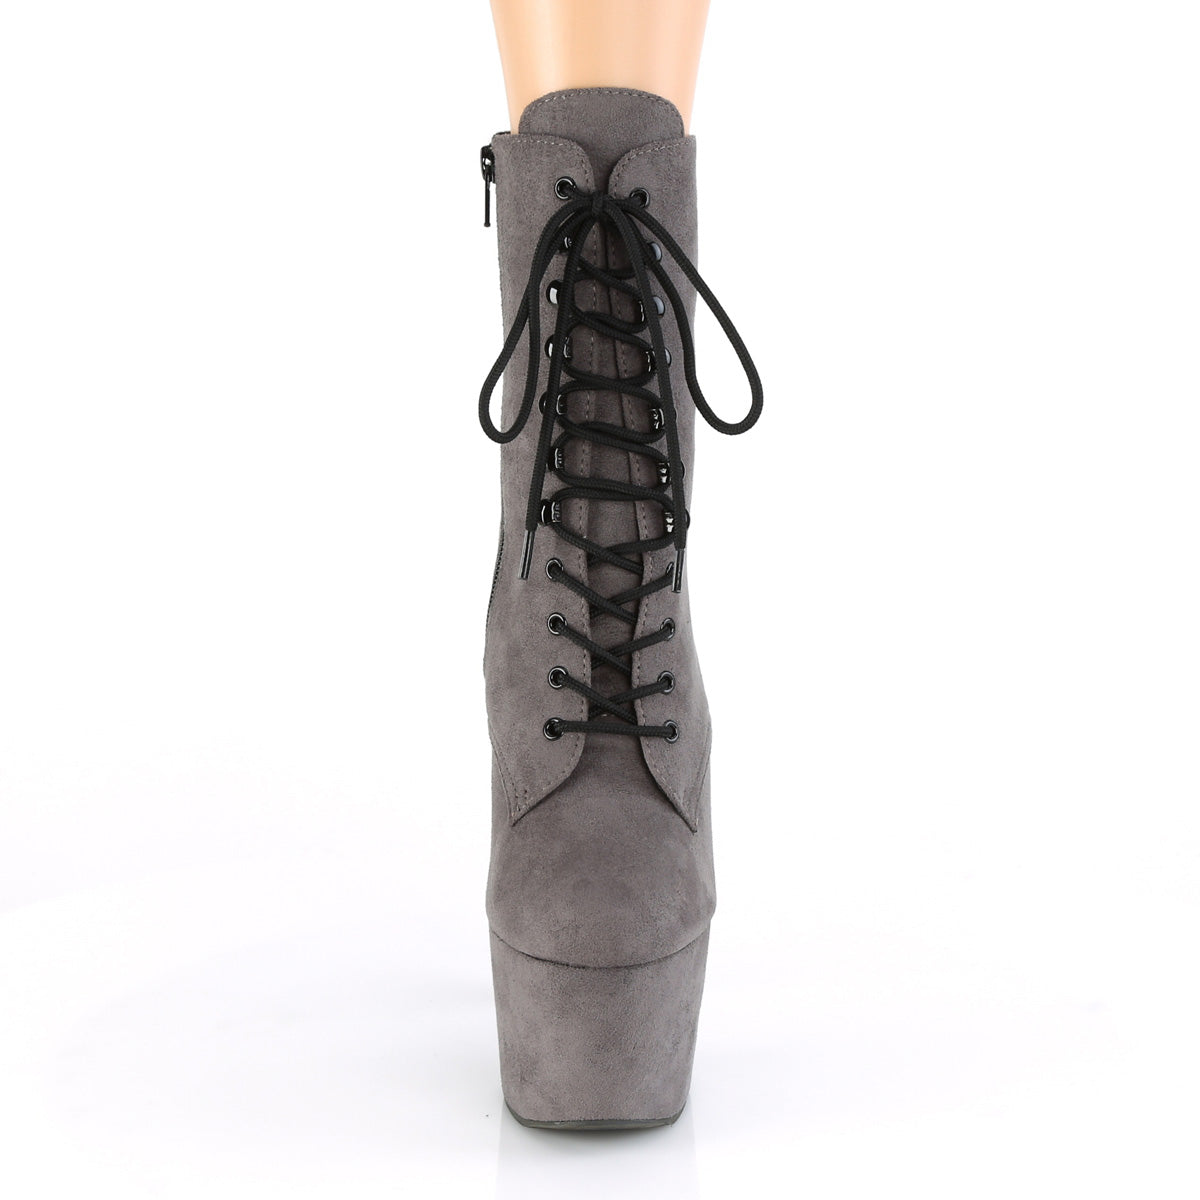 Pleaser Womens Ankle Boots ADORE-1020FS Grey Faux Suede/Grey Faux Suede